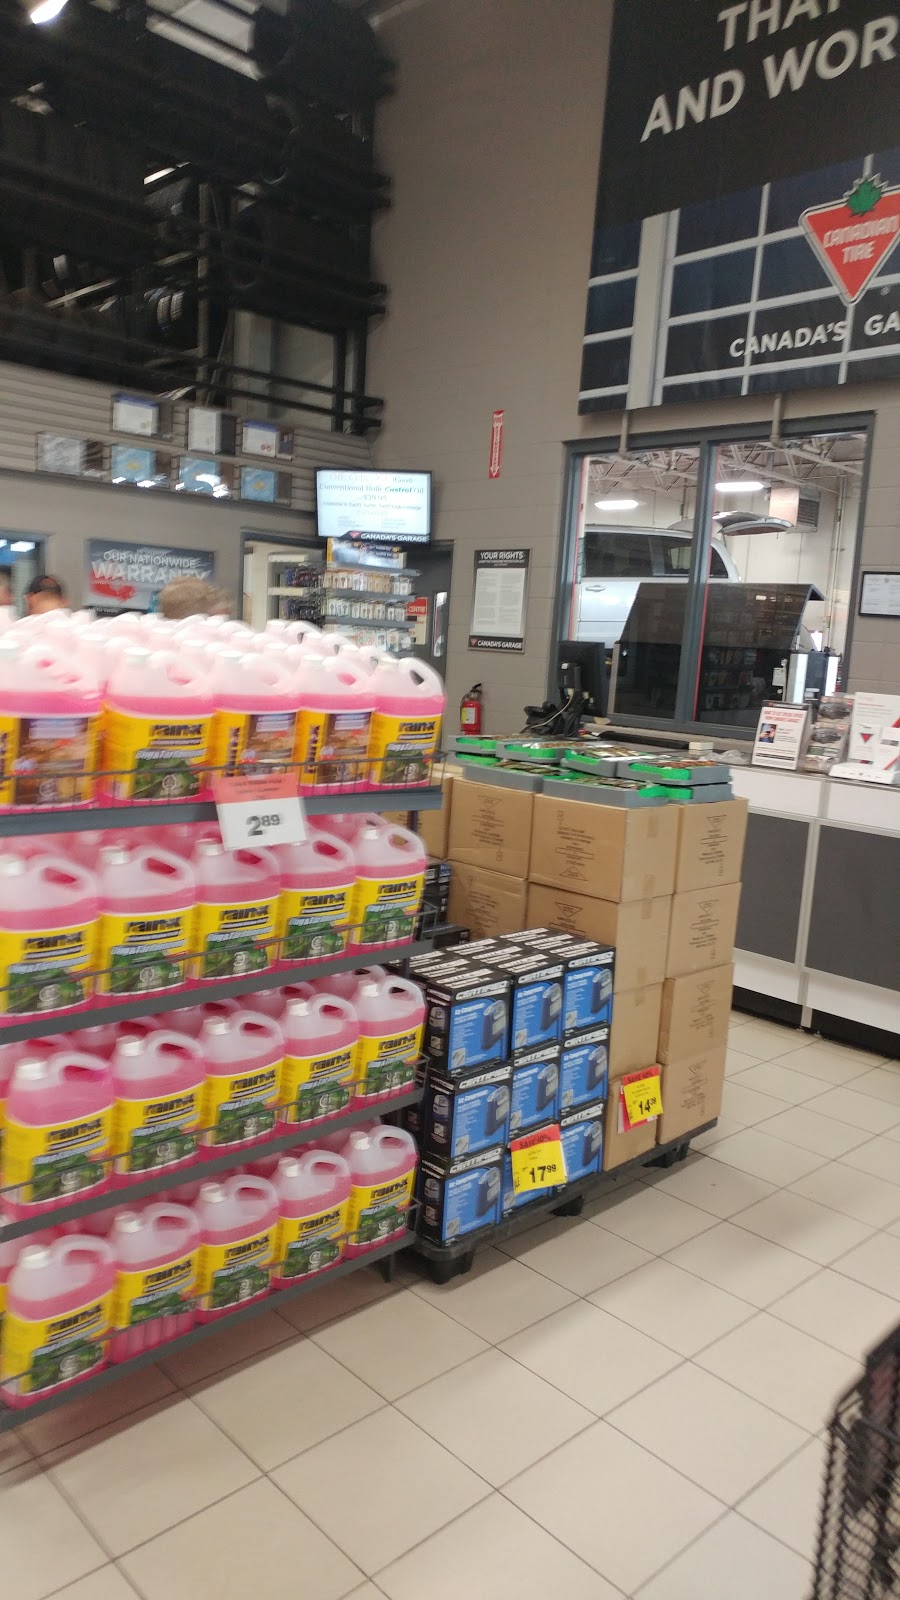 Canadian Tire - St. Thomas, ON | 1063 Talbot St #25, St Thomas, ON N5P 1G4, Canada | Phone: (519) 631-4910